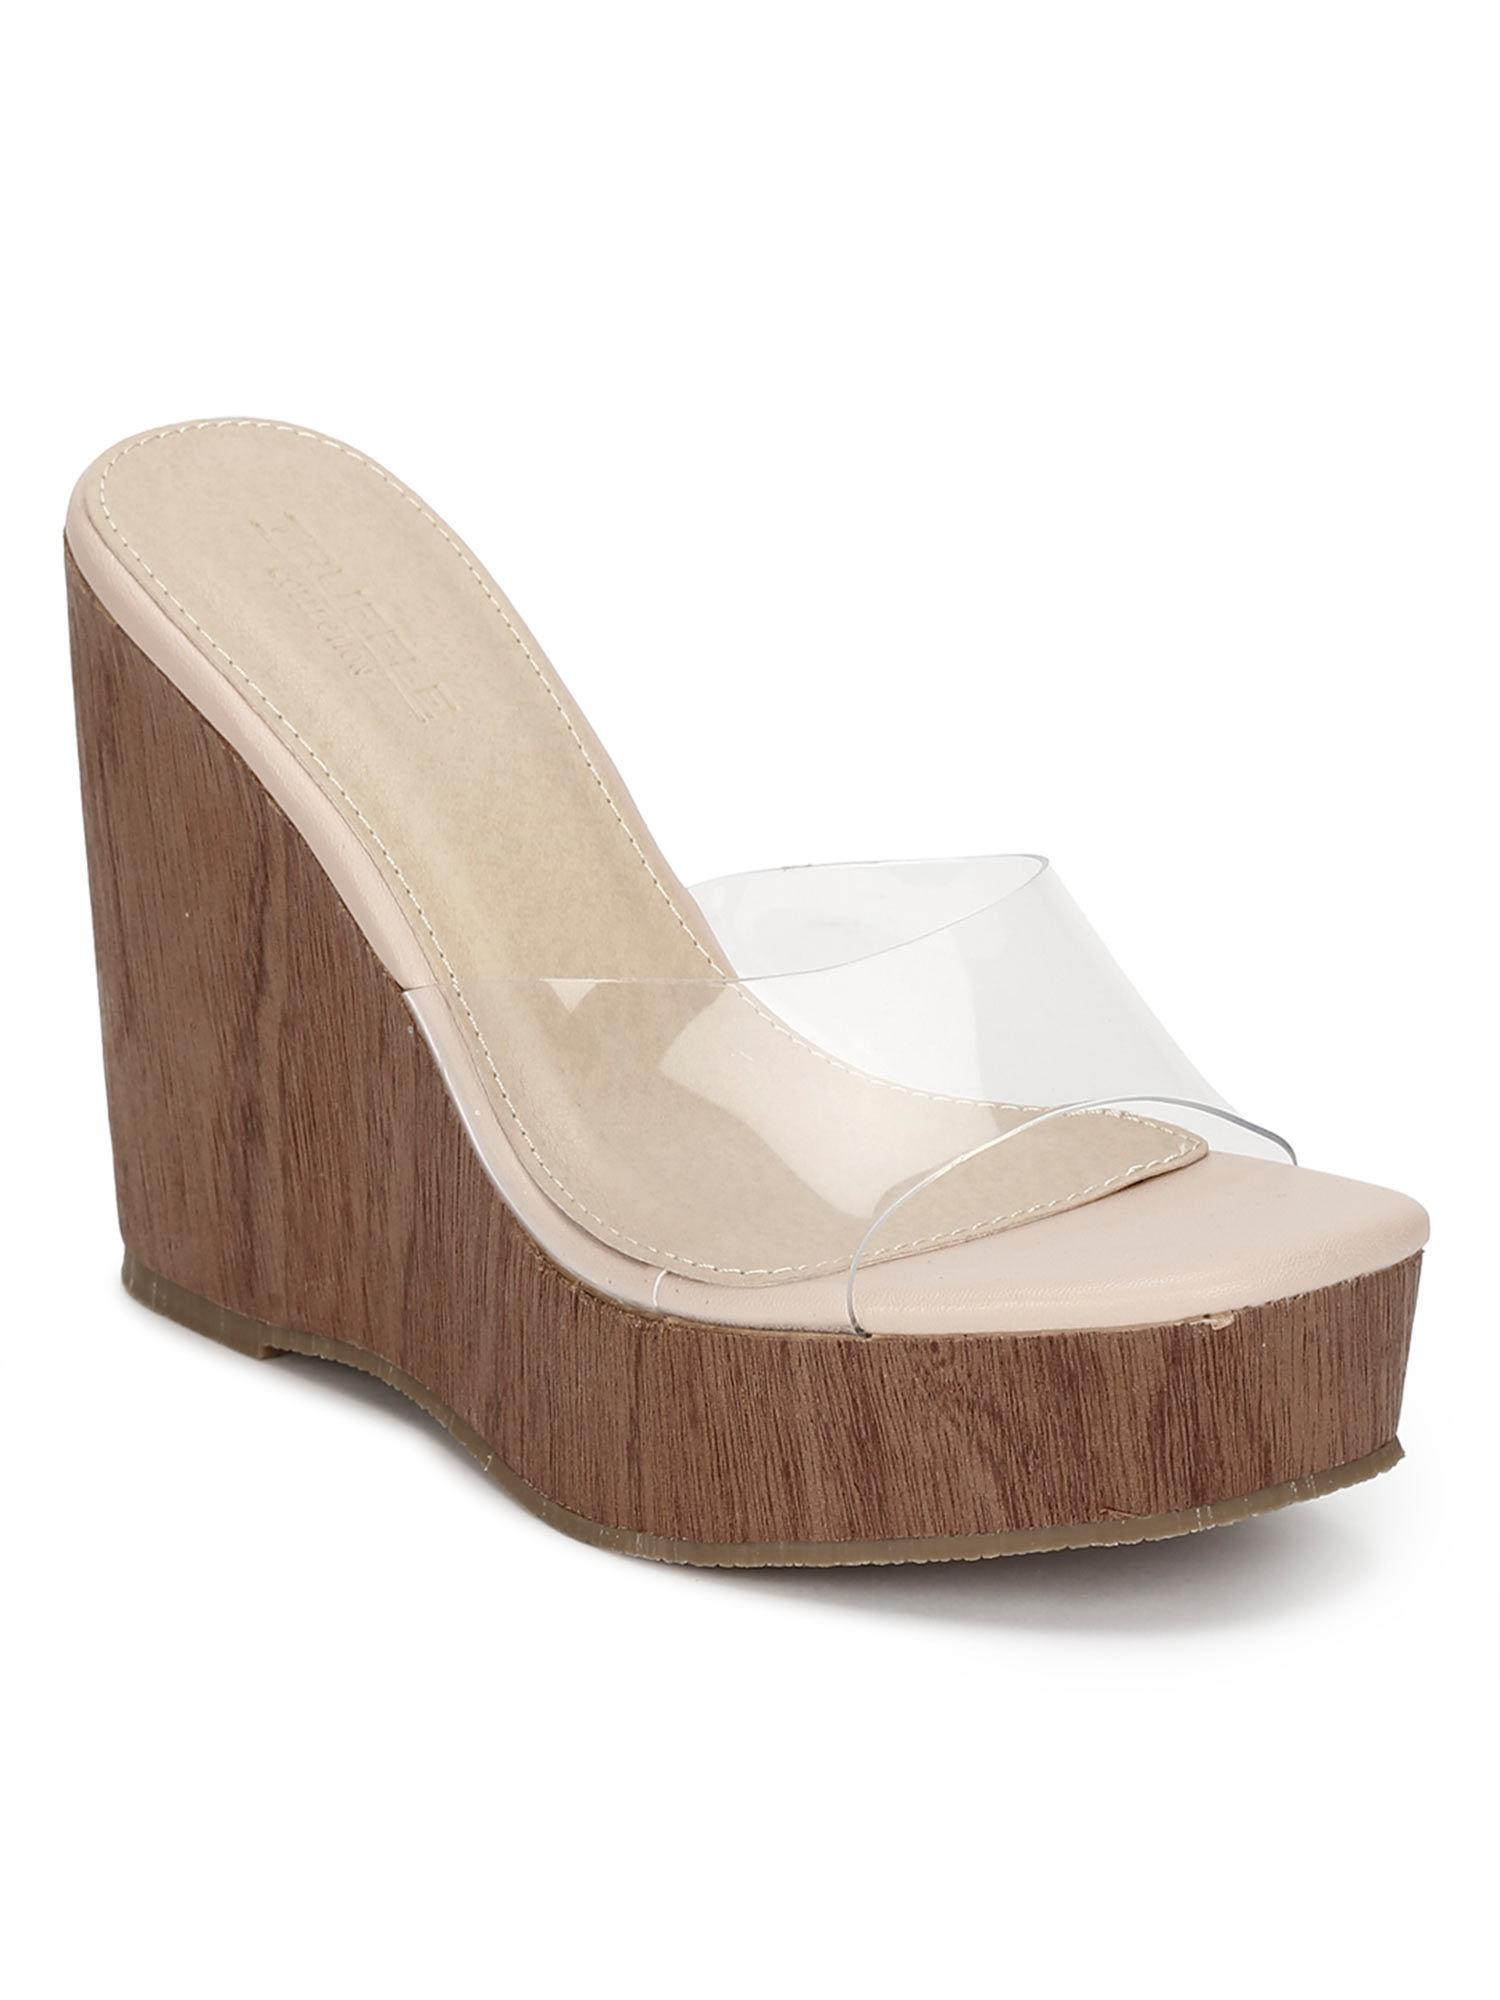 nude solid wedges